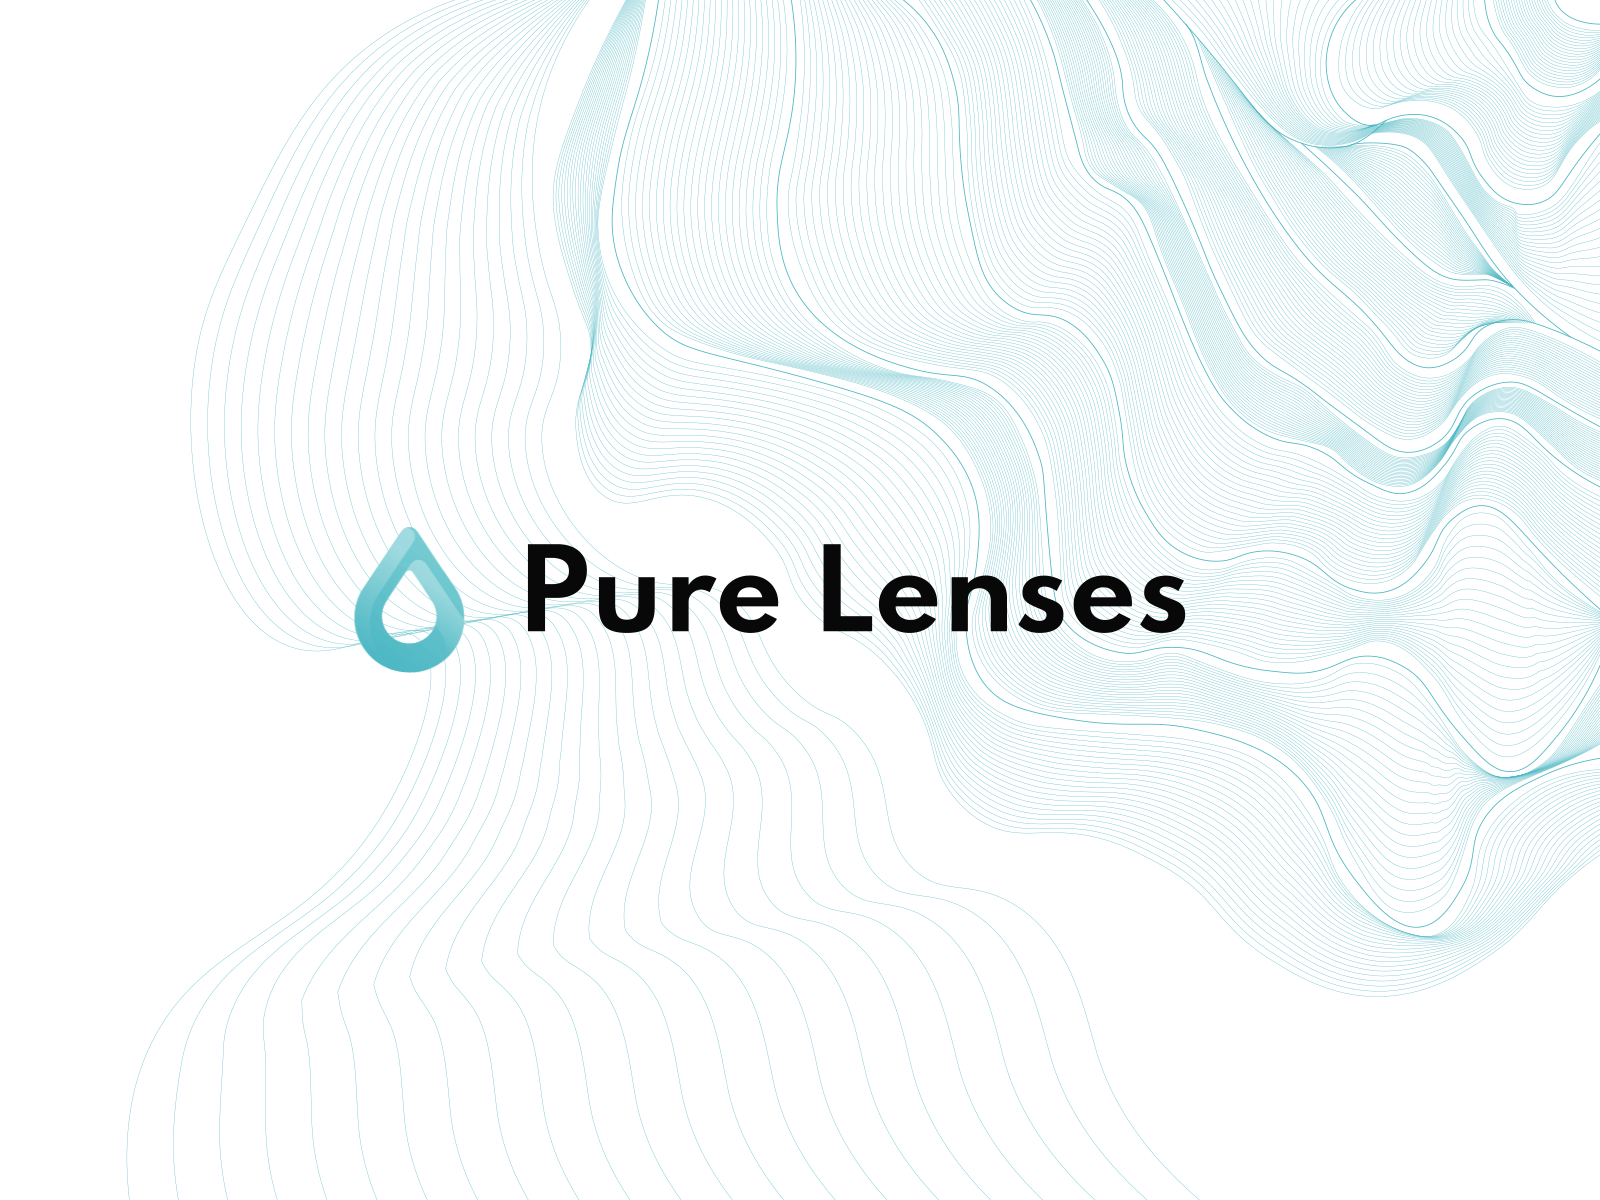 Pure Lenses animation brand identity branding brochure clean drop eyes lenses lines logo logotype ophthalmology optician print design pure transparency trifold